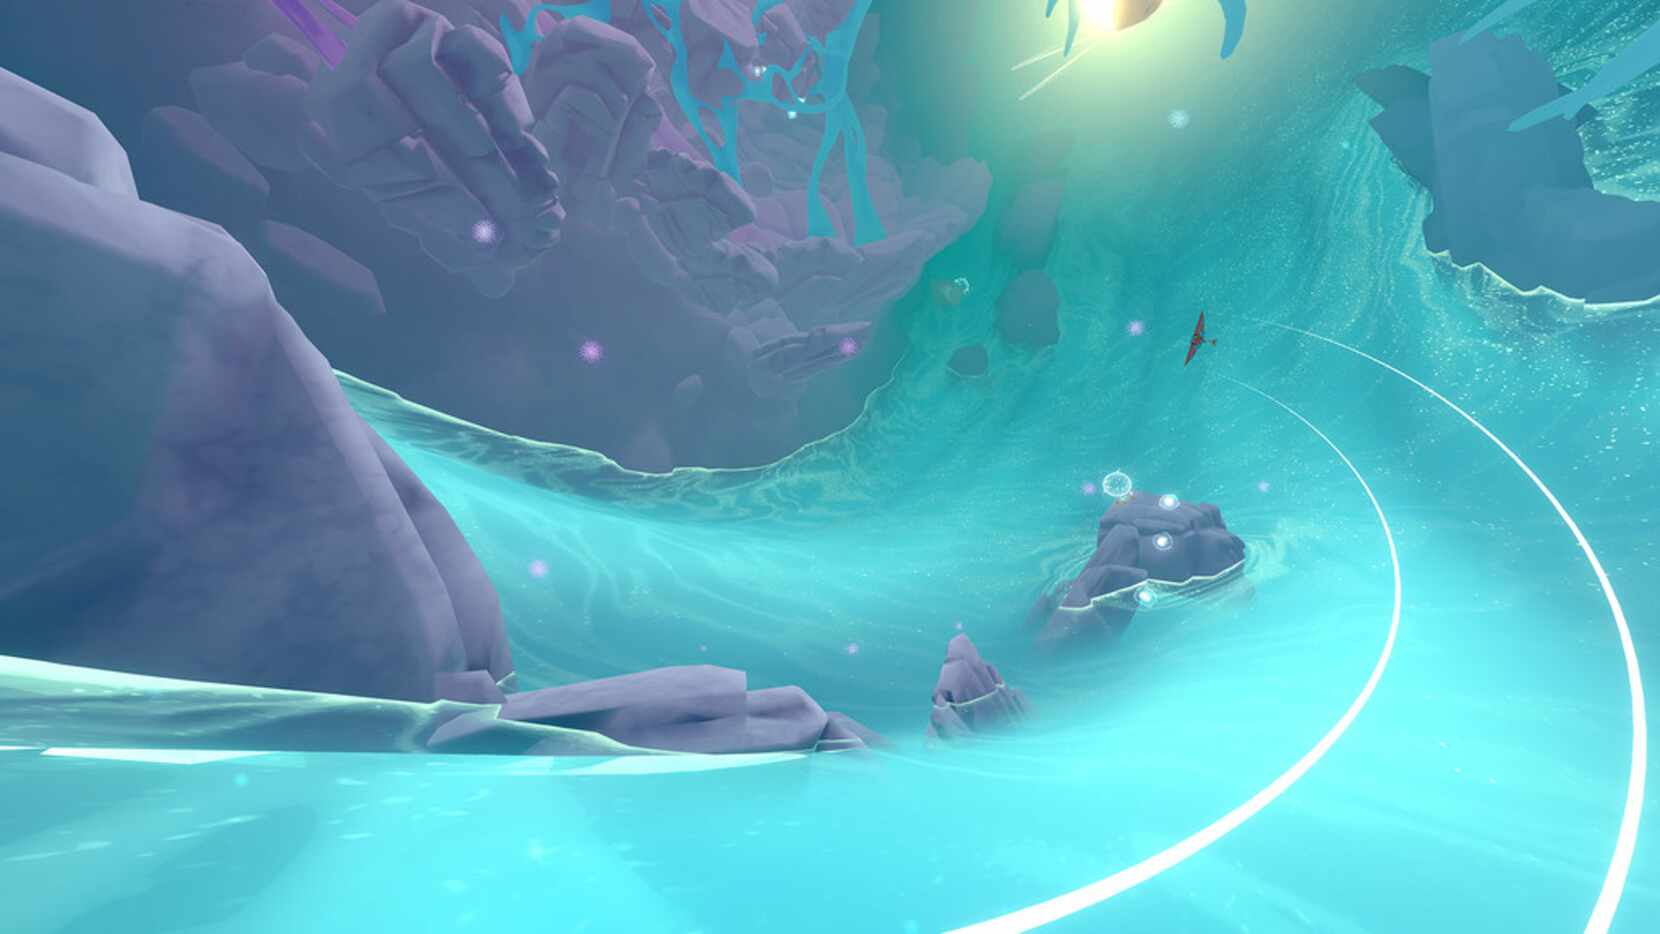 A screenshot from InnerSpace, developed in the Dallas area by PolyKnight Games.